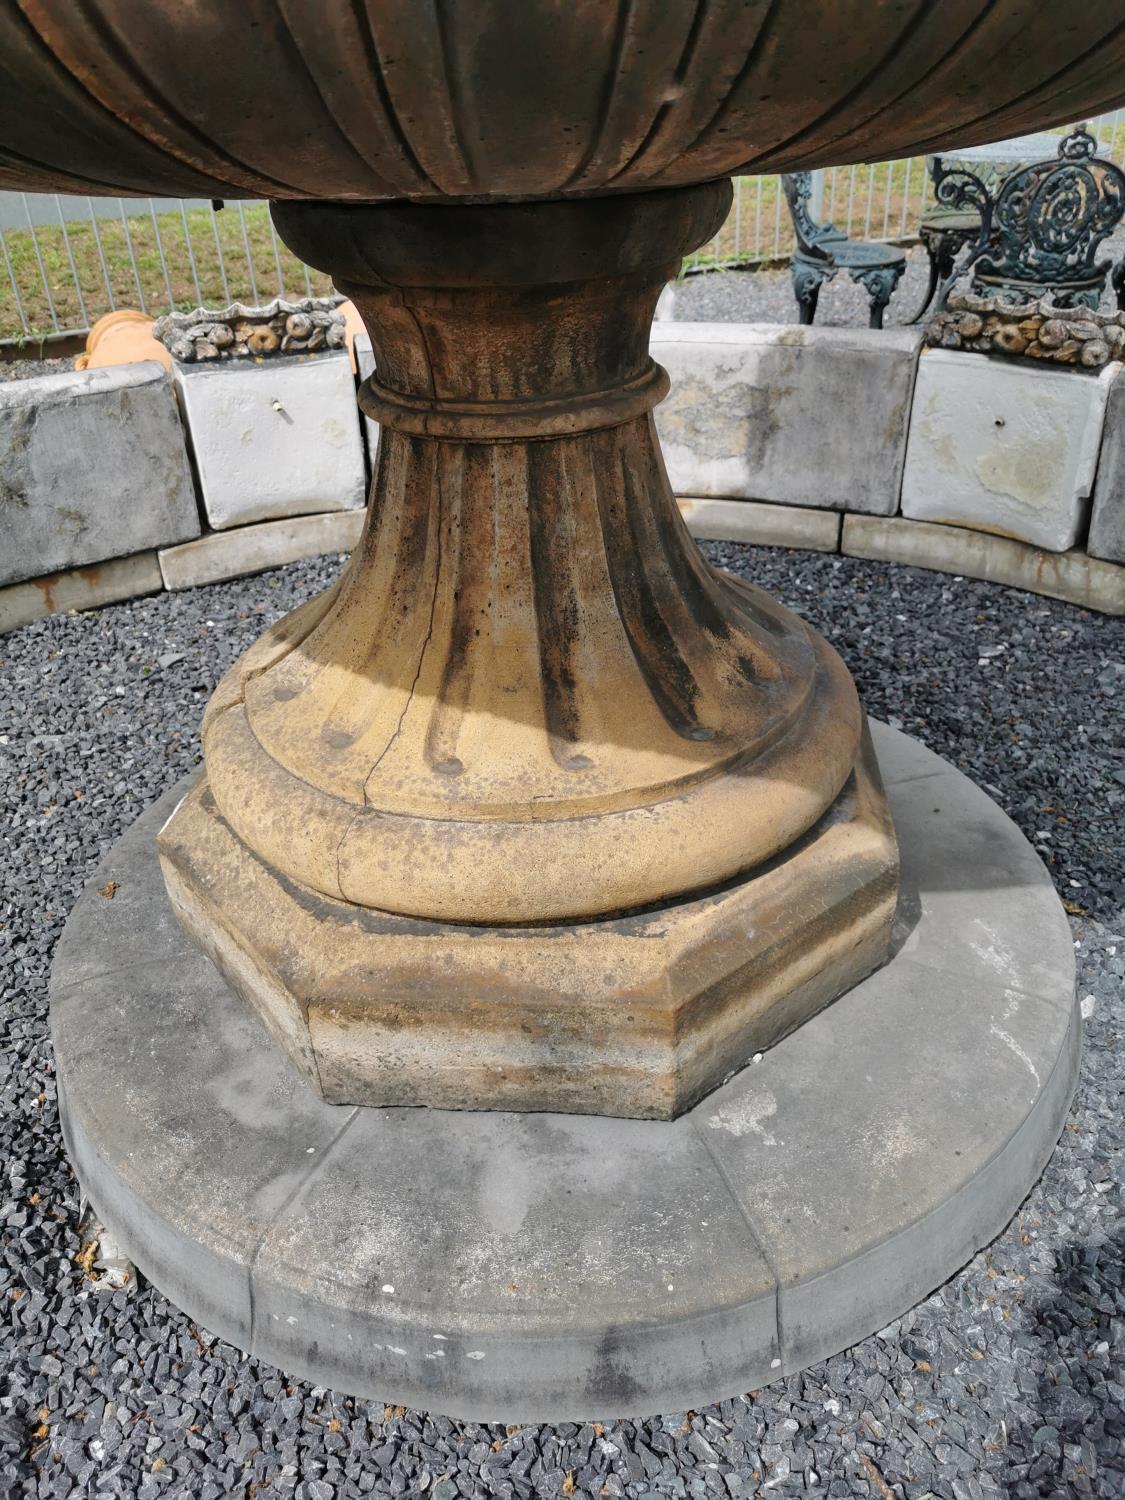 Exceptional three tiered moulded stone French water foutain with surround decorated with shells - Image 6 of 7